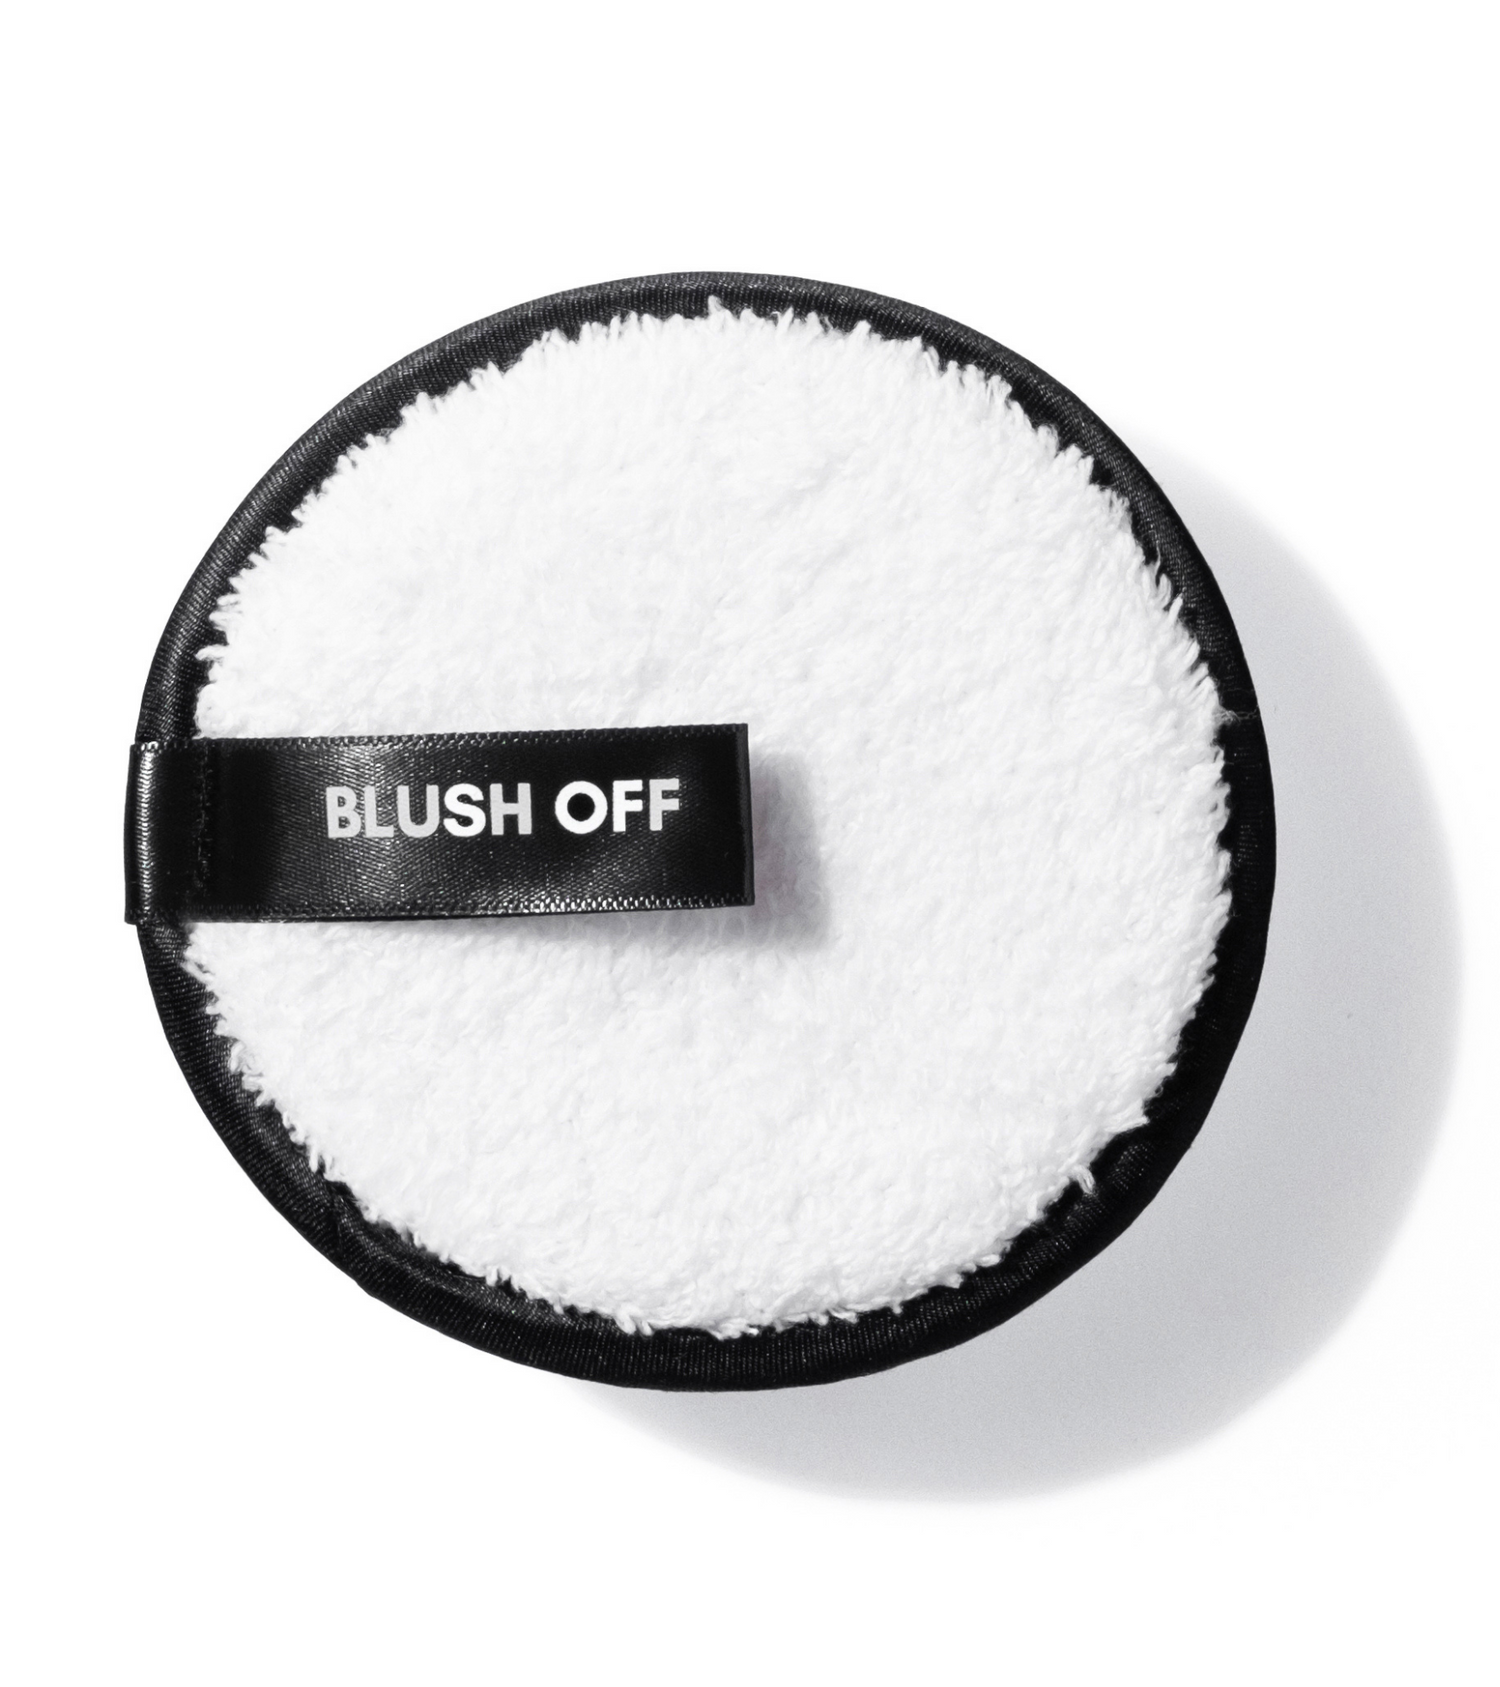 Single Pad - Blush Off - Eco Friendly Makeup Remover - FREE EXPRESS SHIPPING  